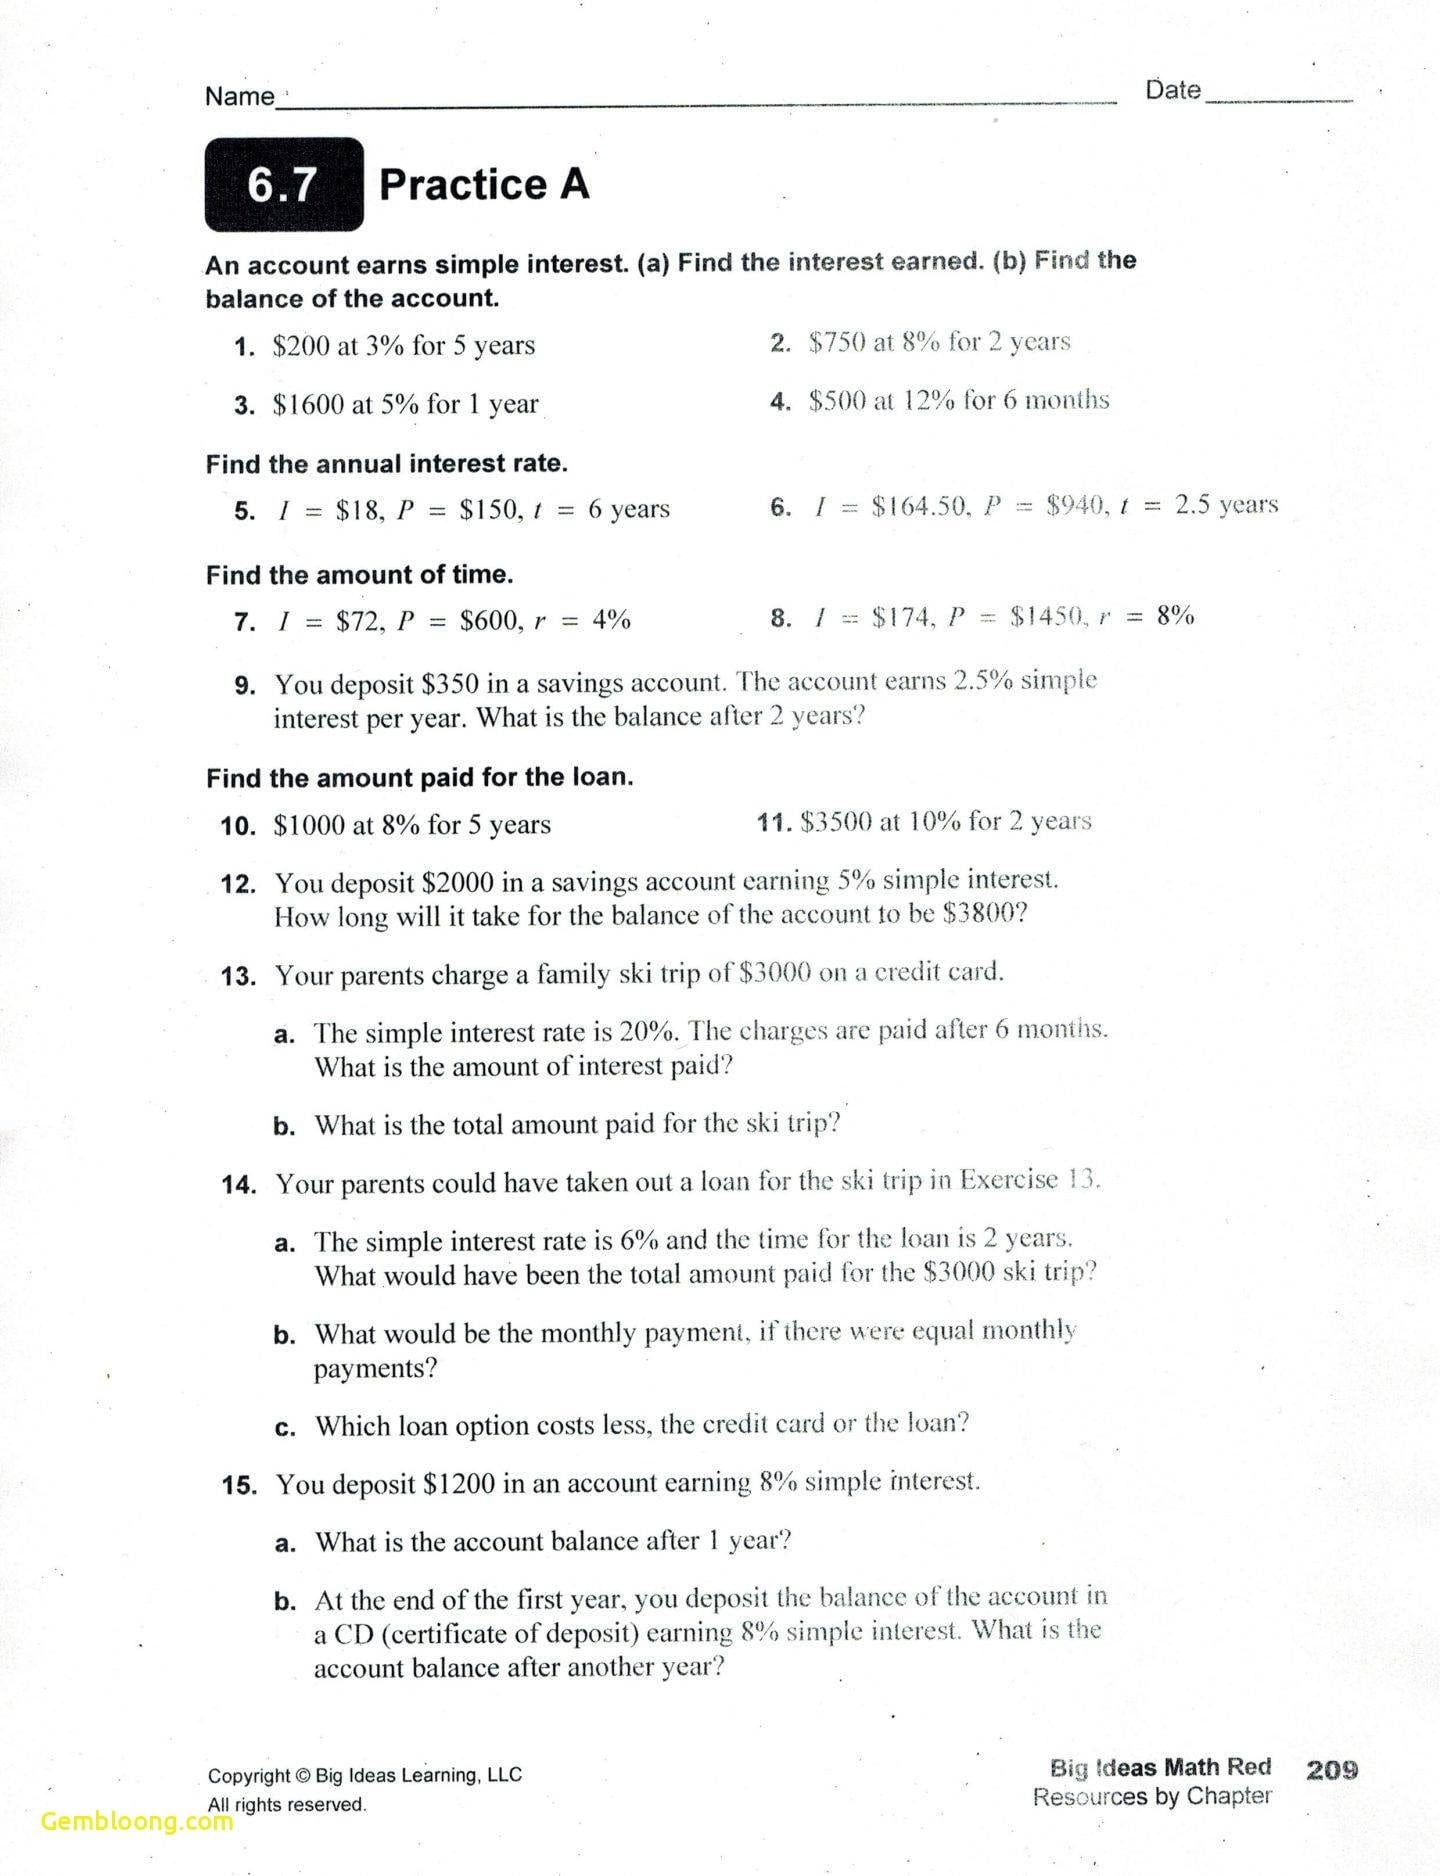 Compound Interest And E Worksheet Answers  Cramerforcongress And Compound Interest Worksheet Answers